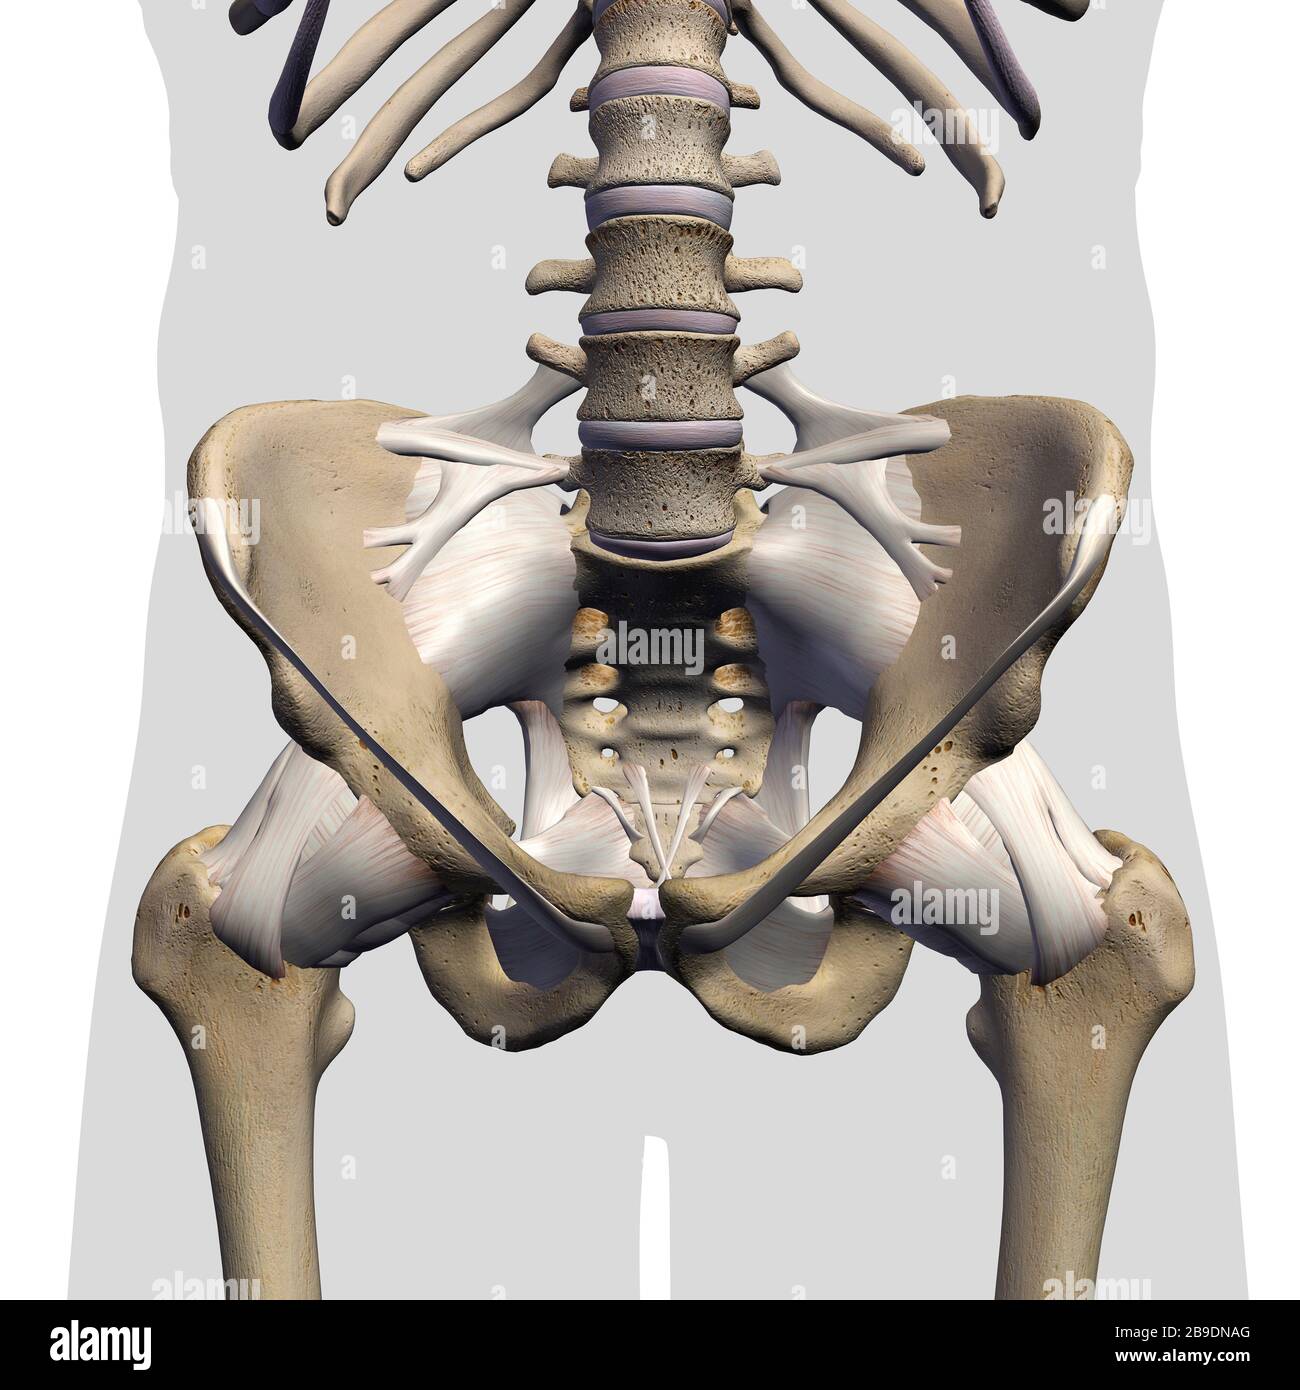 3D rendering of male pelvis, hip, leg bones and ligaments on white background. Stock Photo